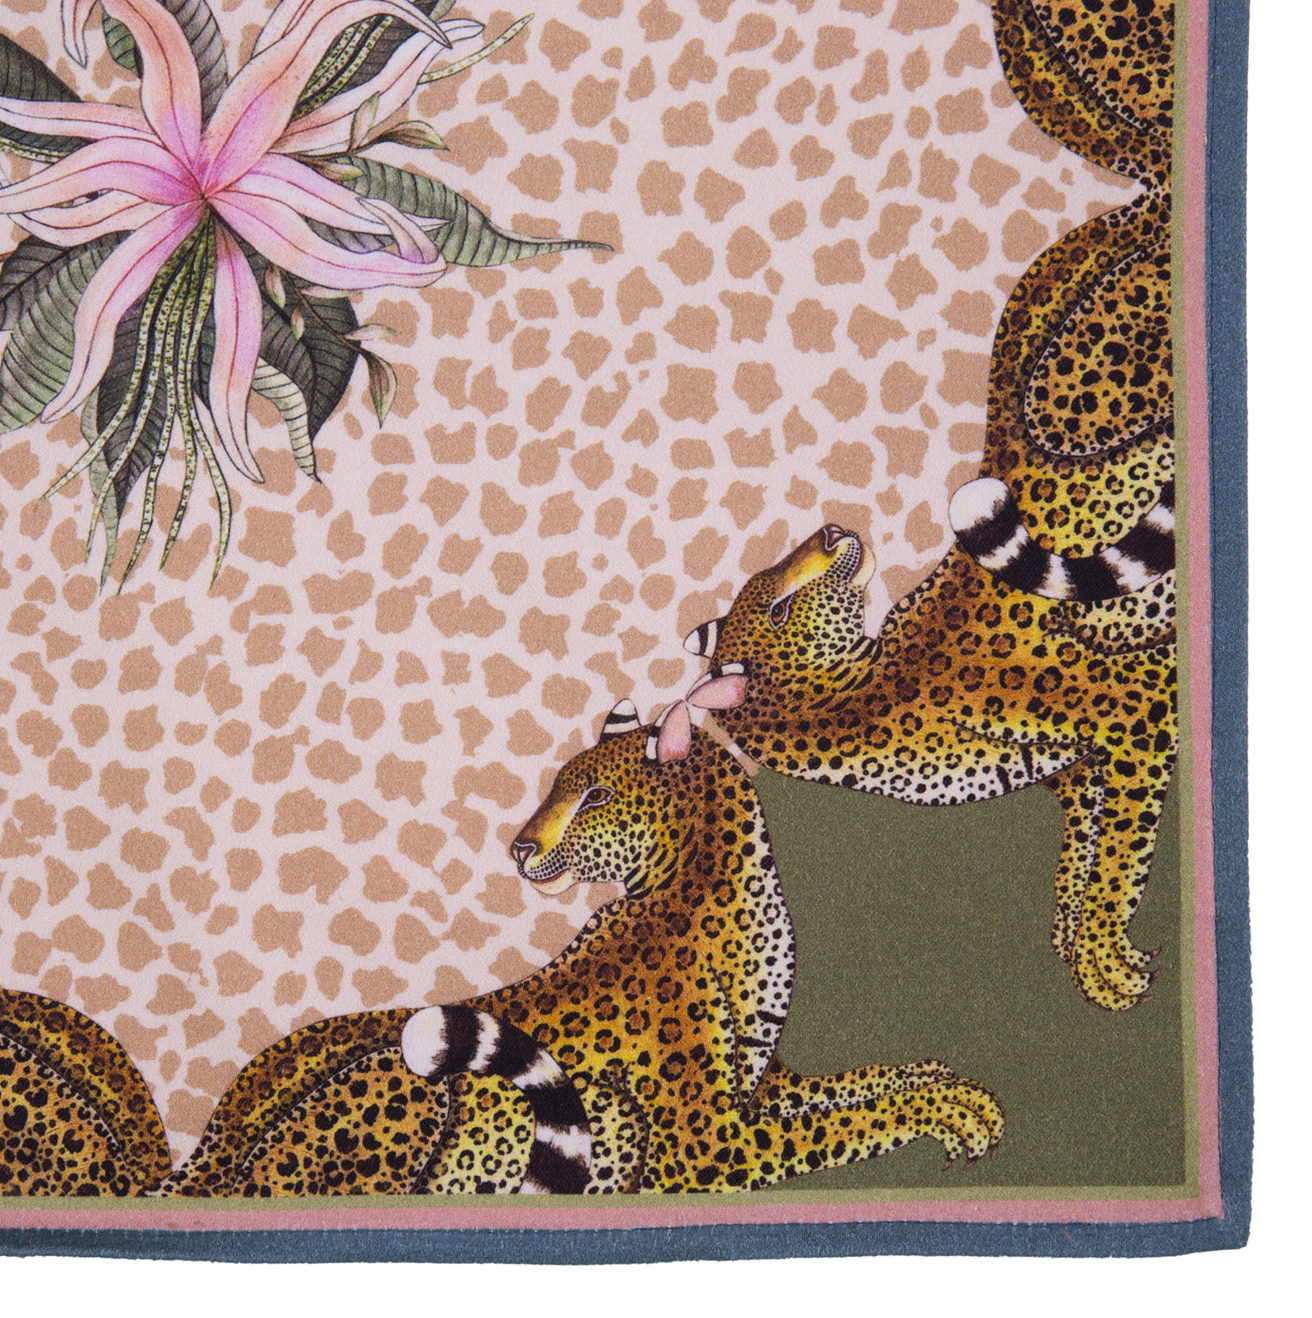 Ardmore "Leopard Lily Stone" napkin sets from South Africa